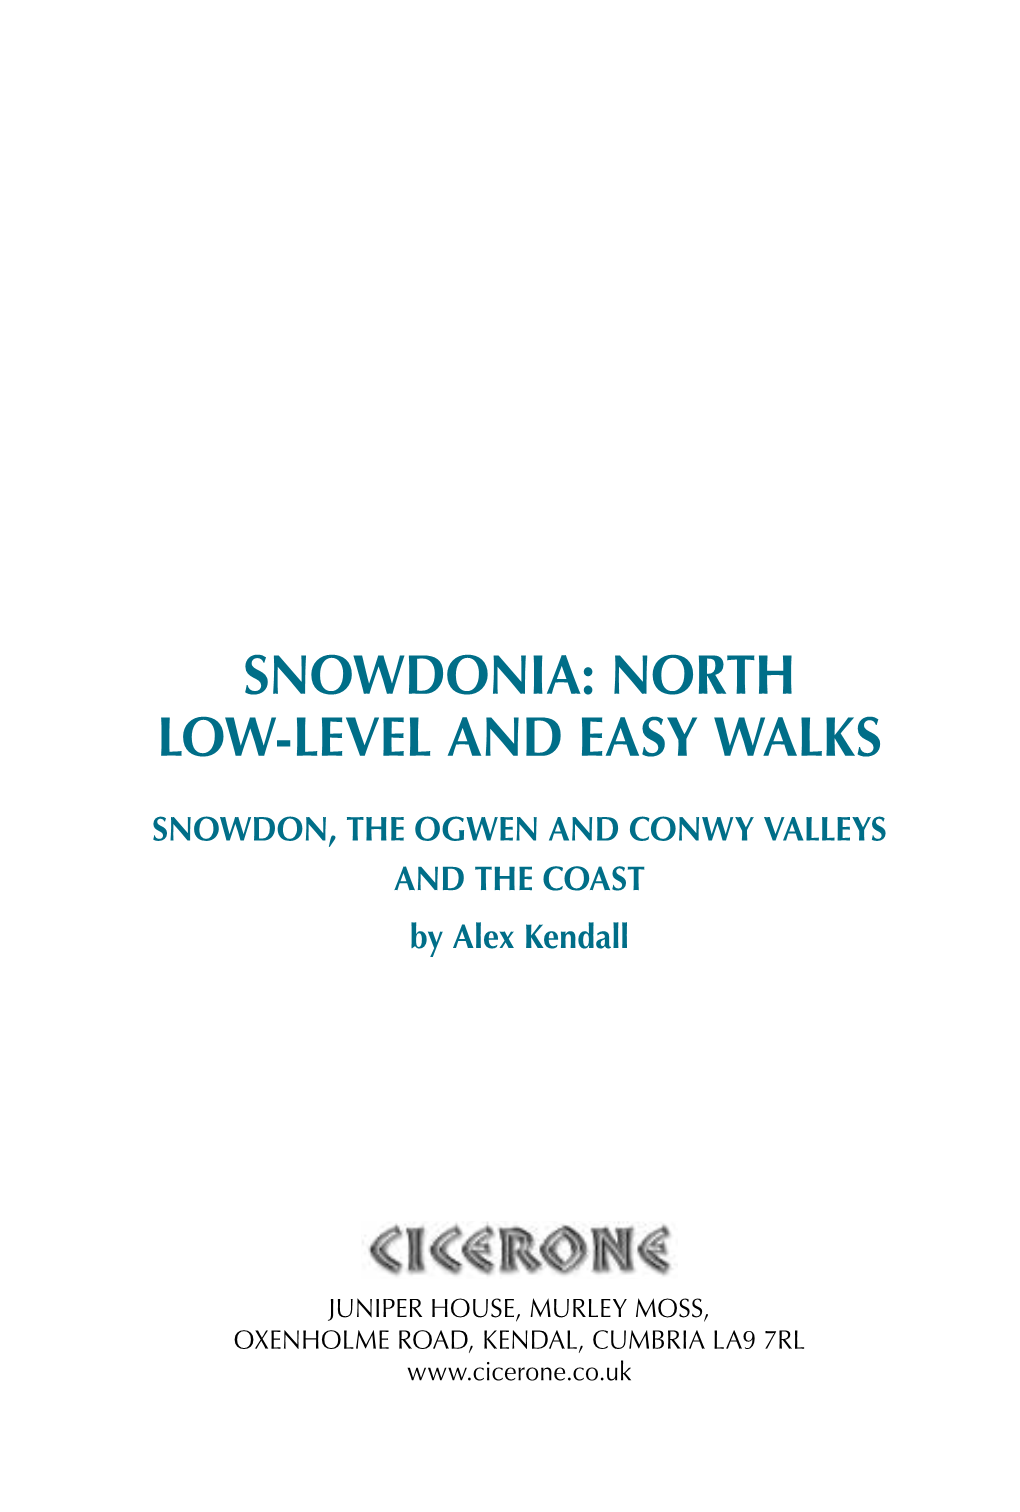 Snowdonia: North Low-Level and Easy Walks